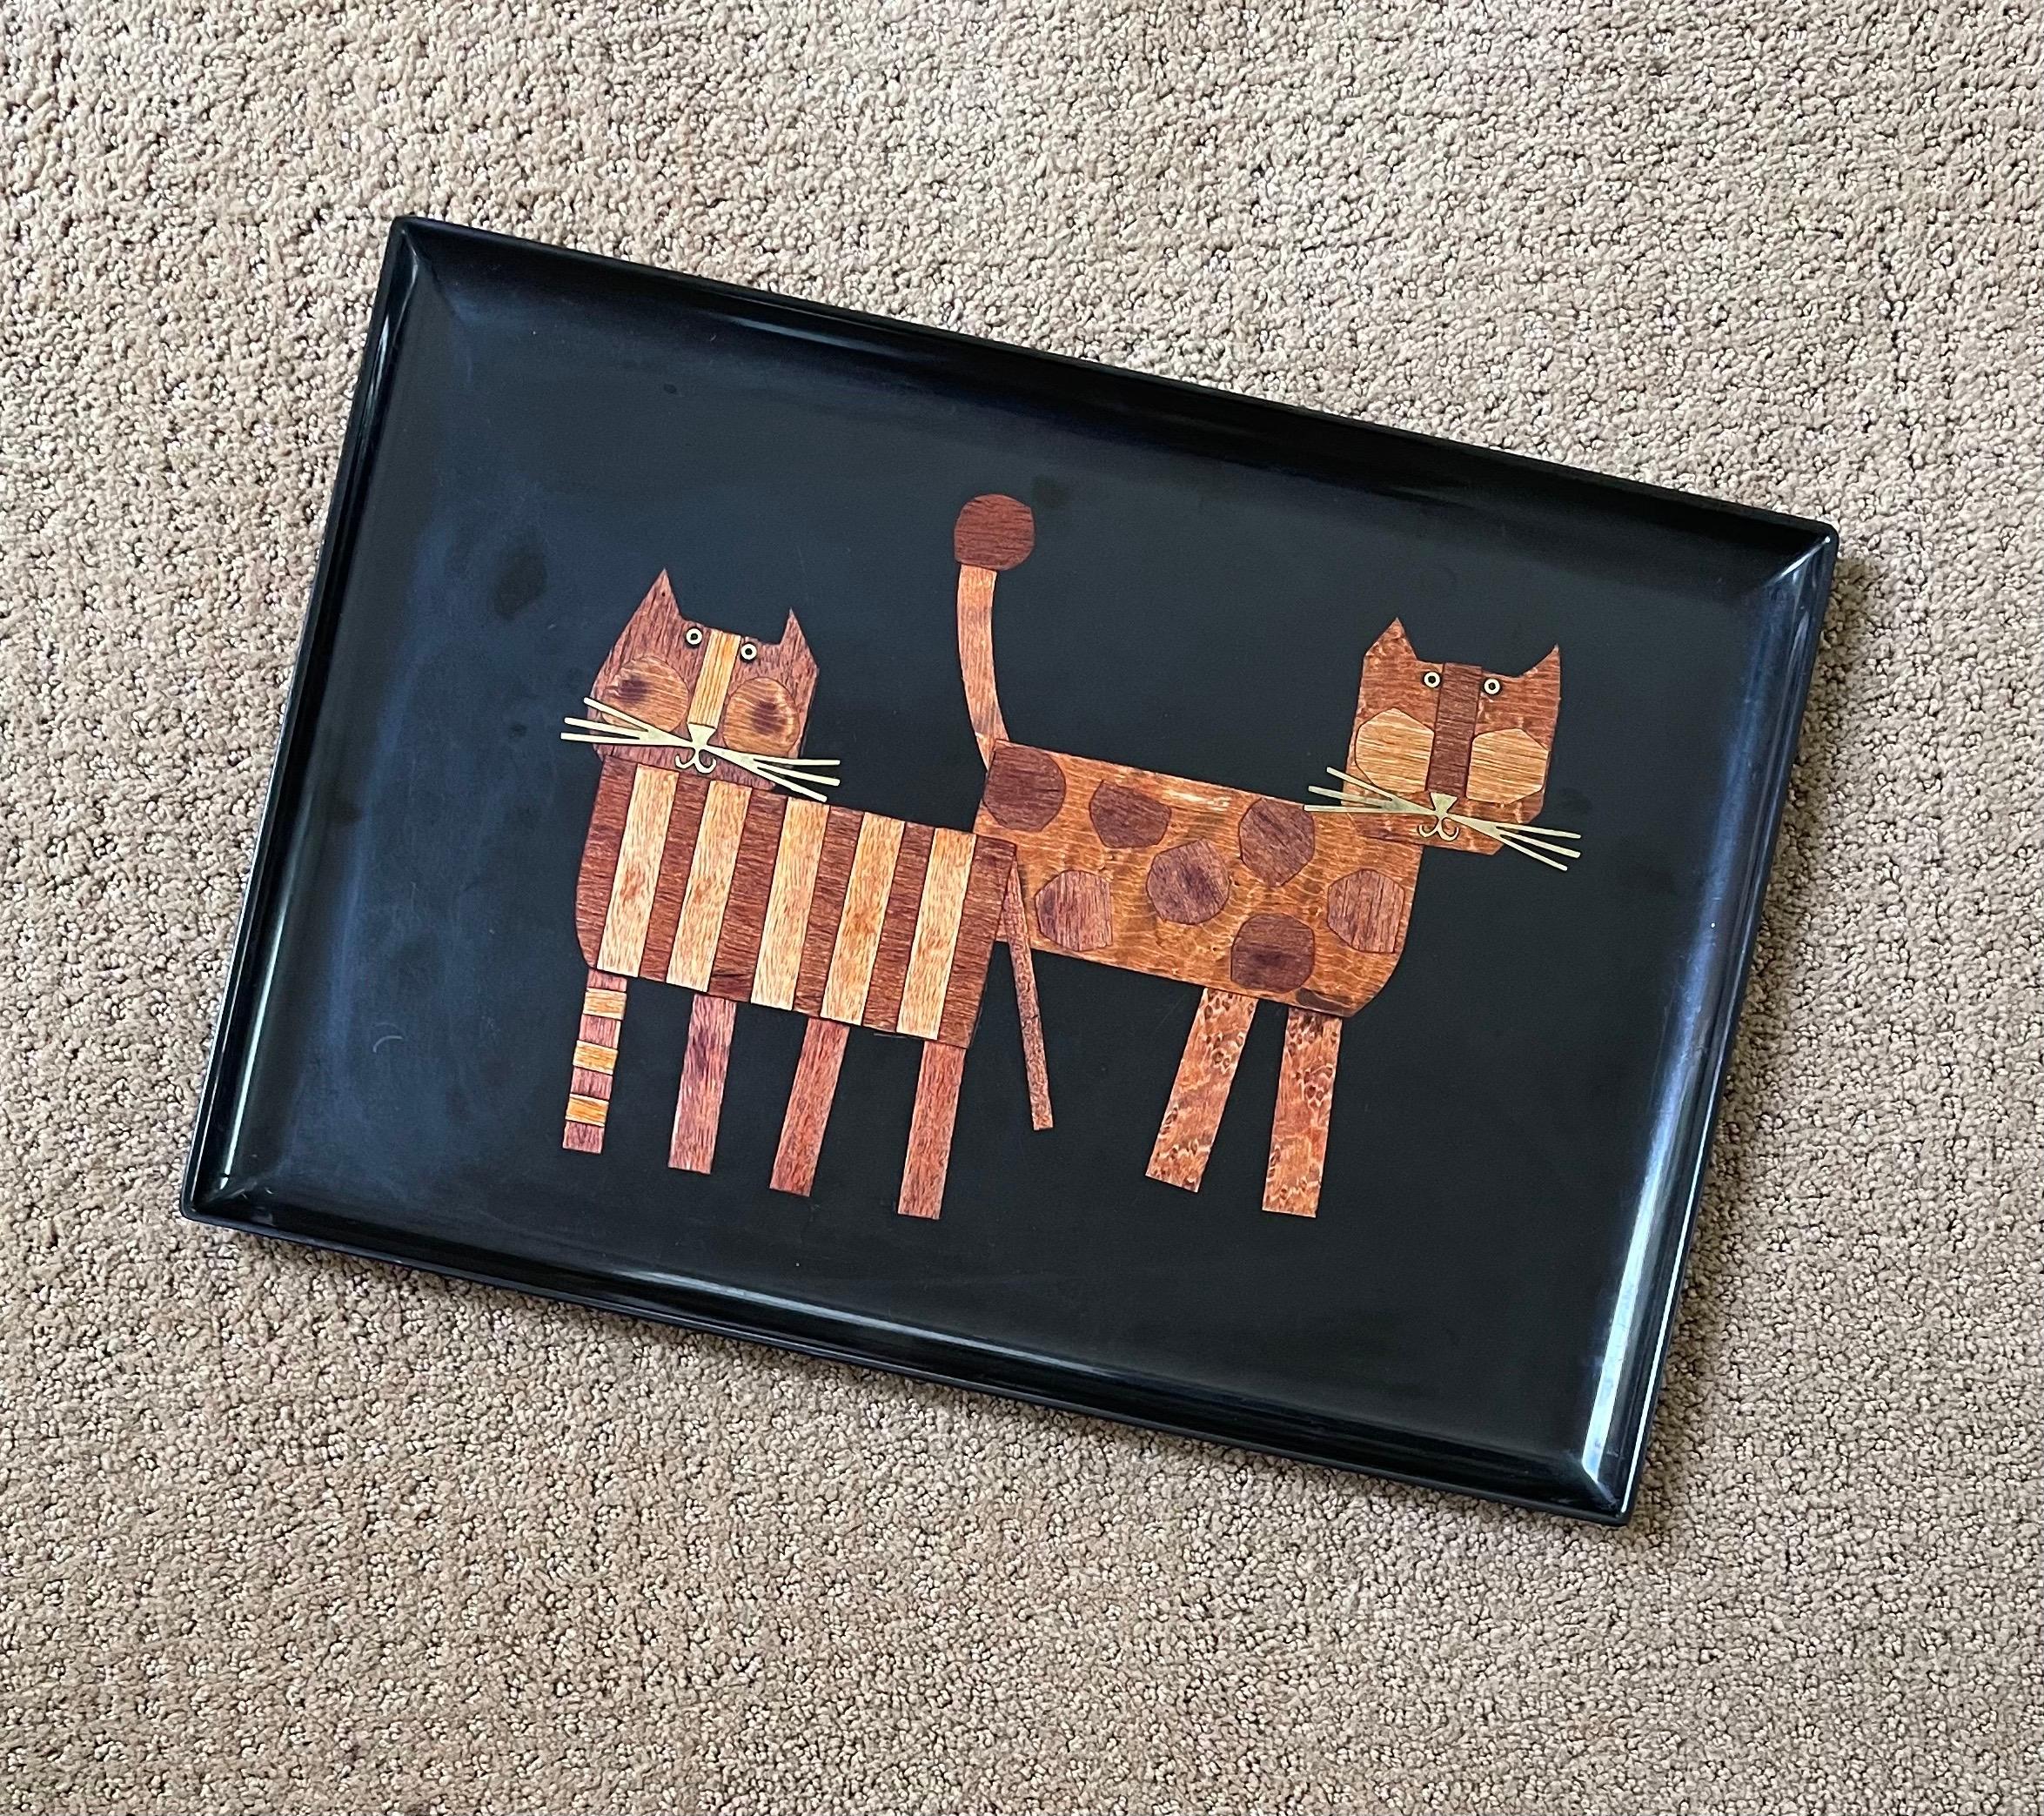 North American Inlaid Wood Cats Tray by Couroc California